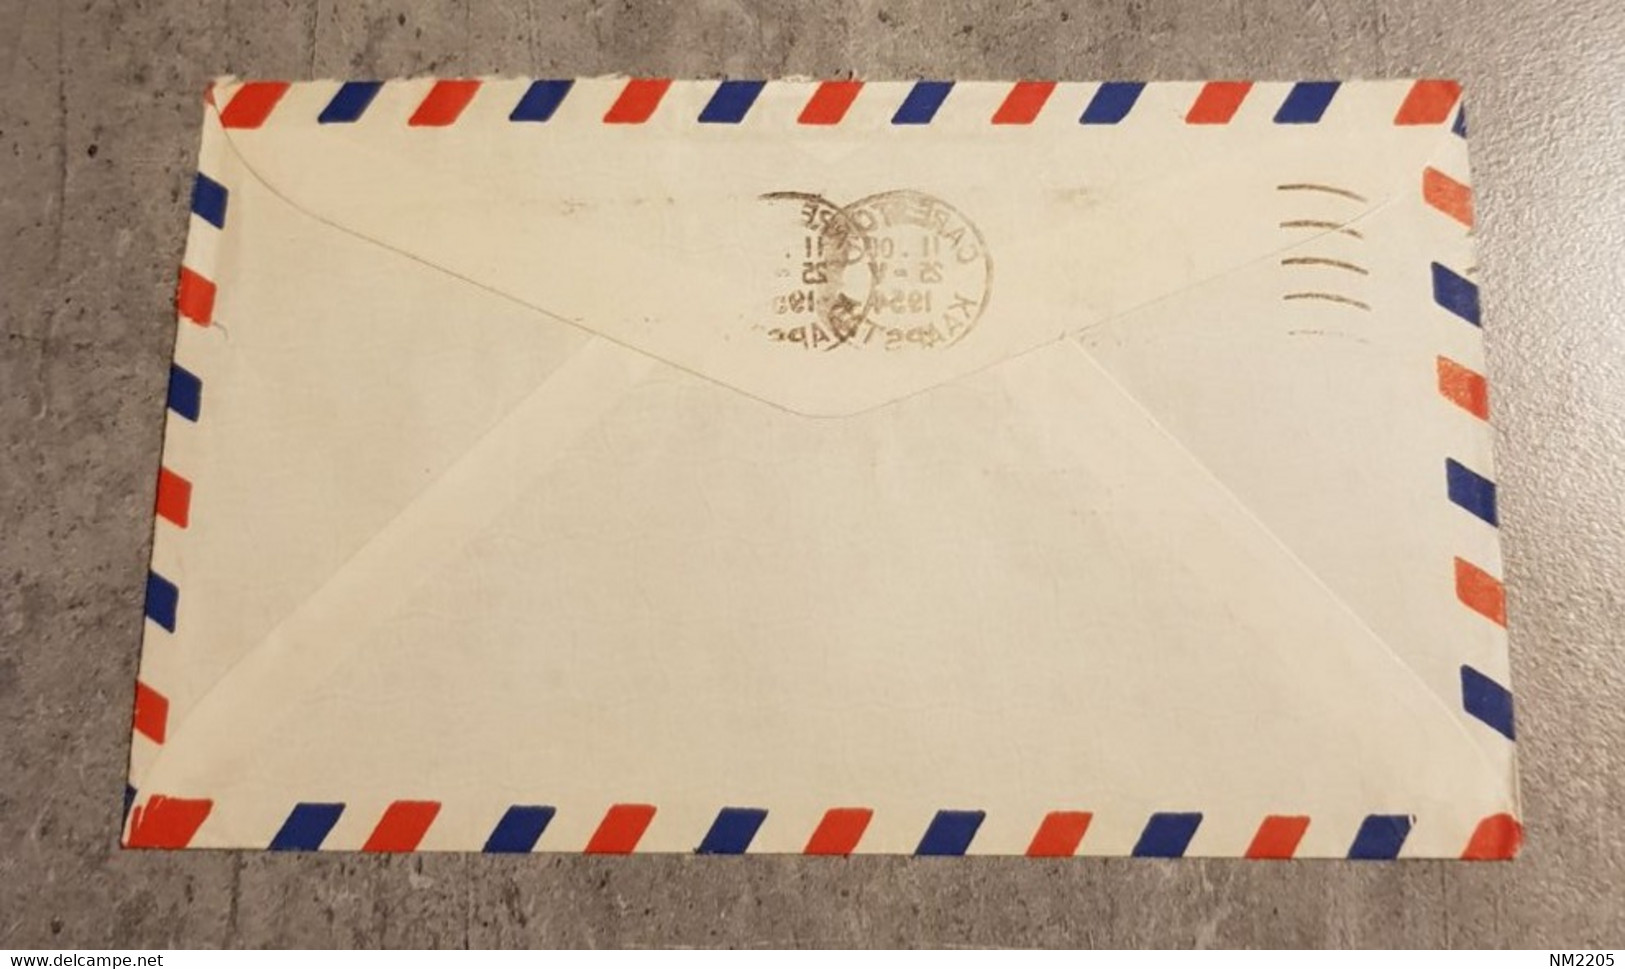 SOUTH AFRICA AIR MAIL COVER CIRCULED SEND TO GERMANY - Posta Aerea